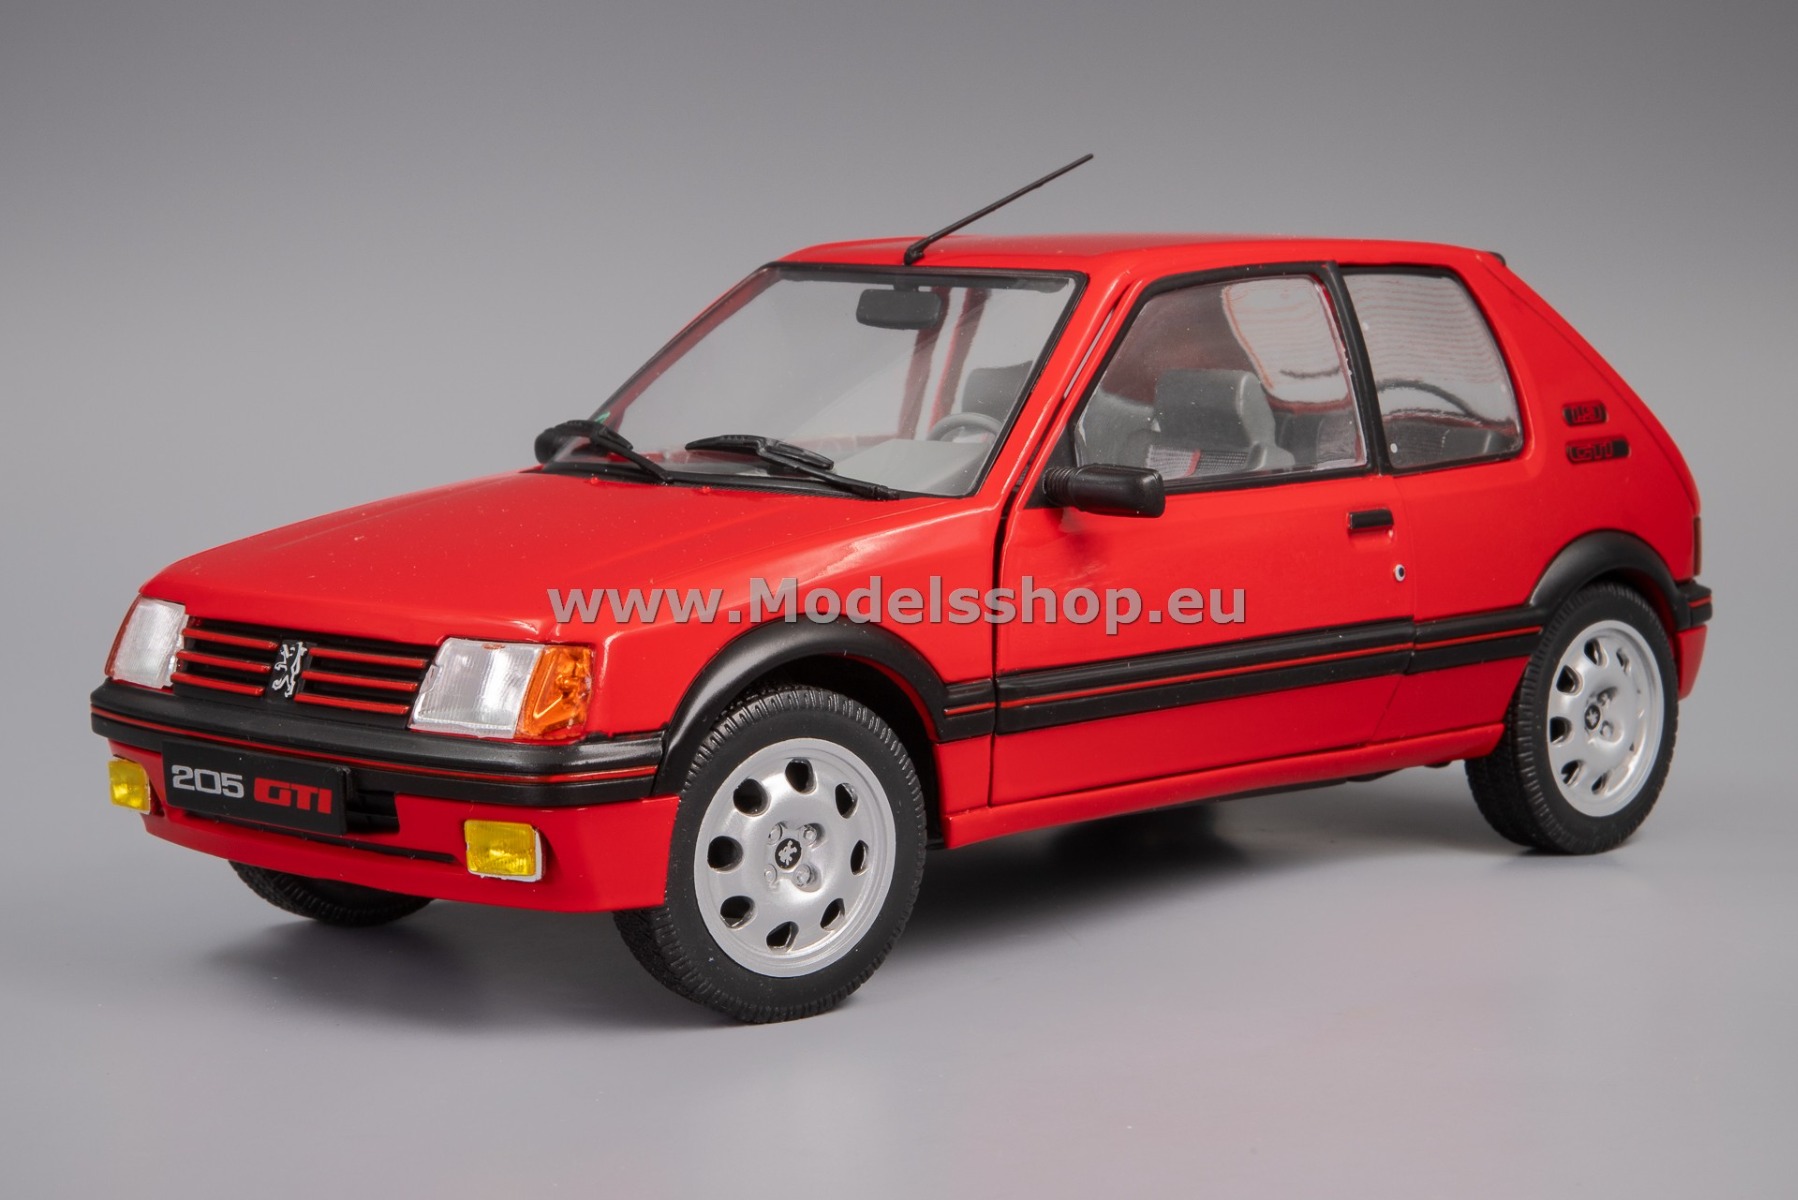 Solido S1801702  Peugeot 205 GTI 1.9L MK 1, 1988 /red vallelunga/